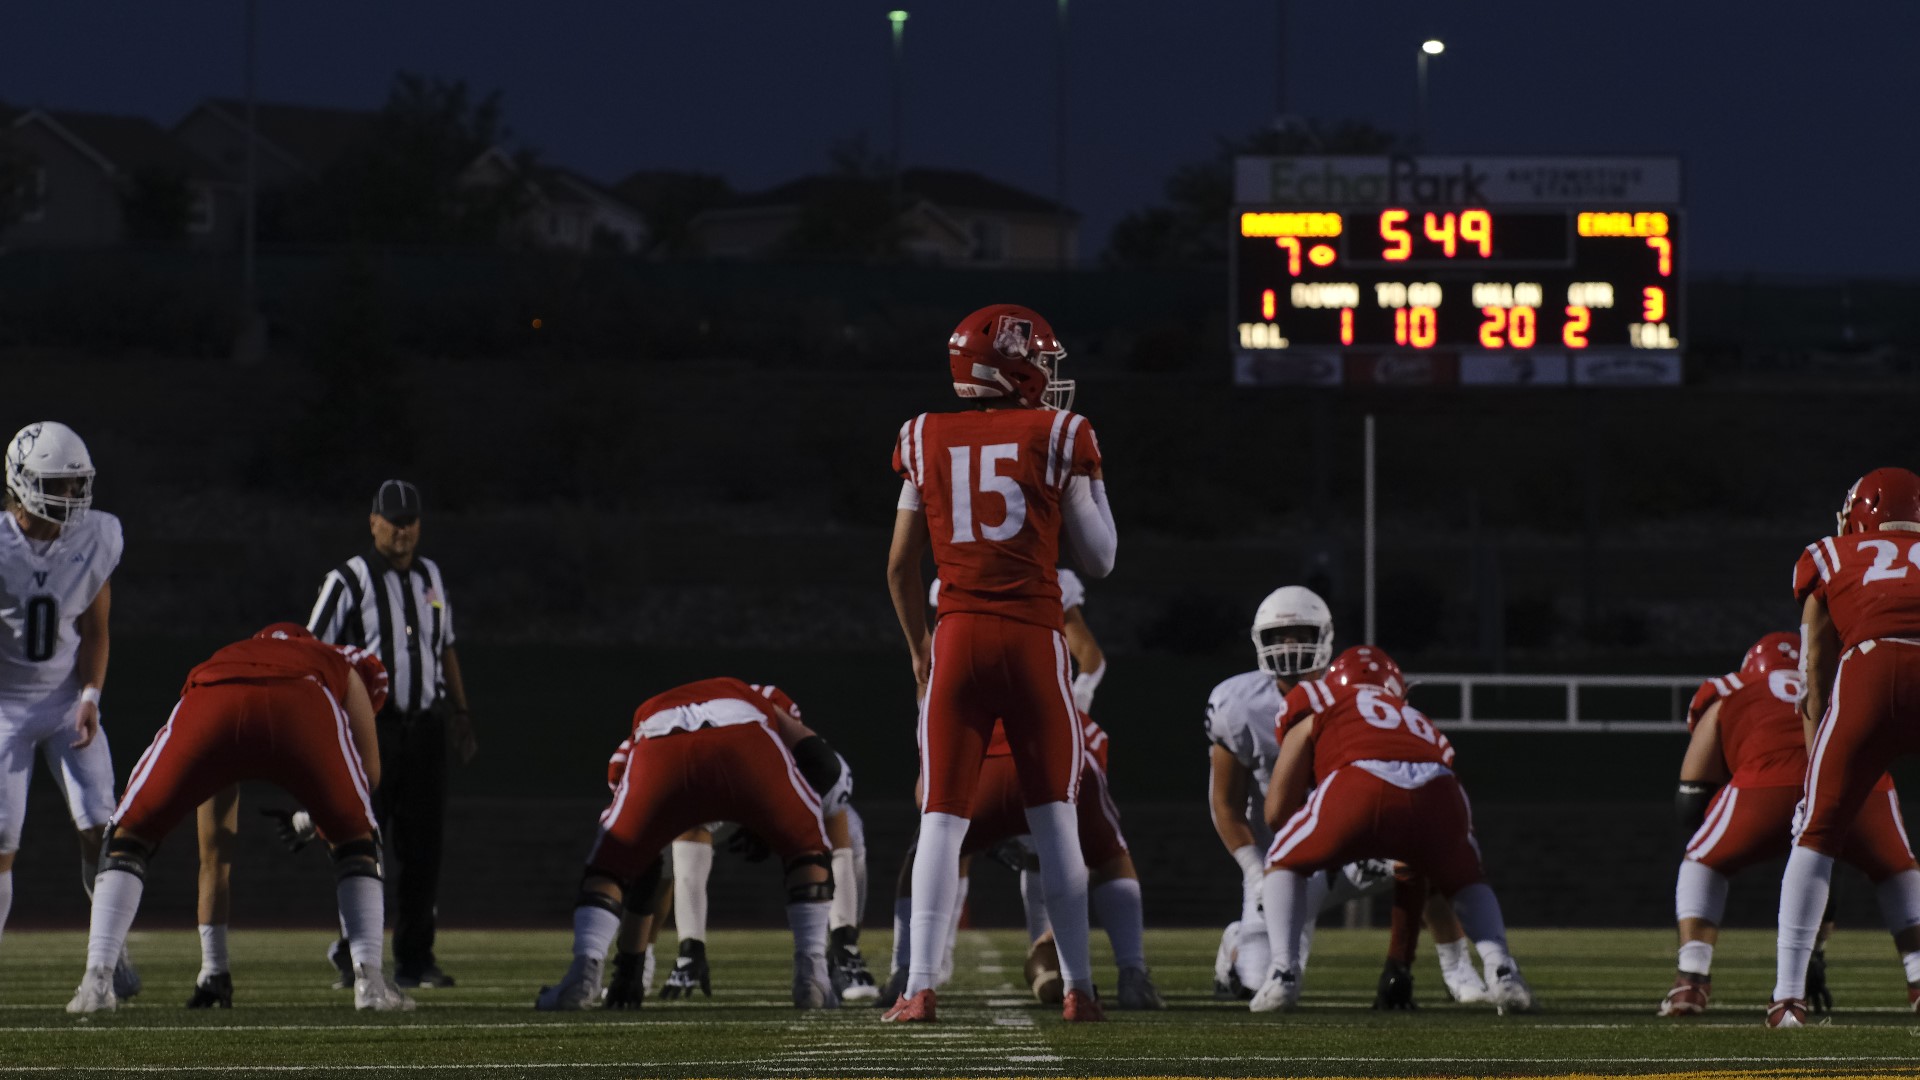 Regis Jesuit wanted revenge and earned it in a close one against Valor Christian